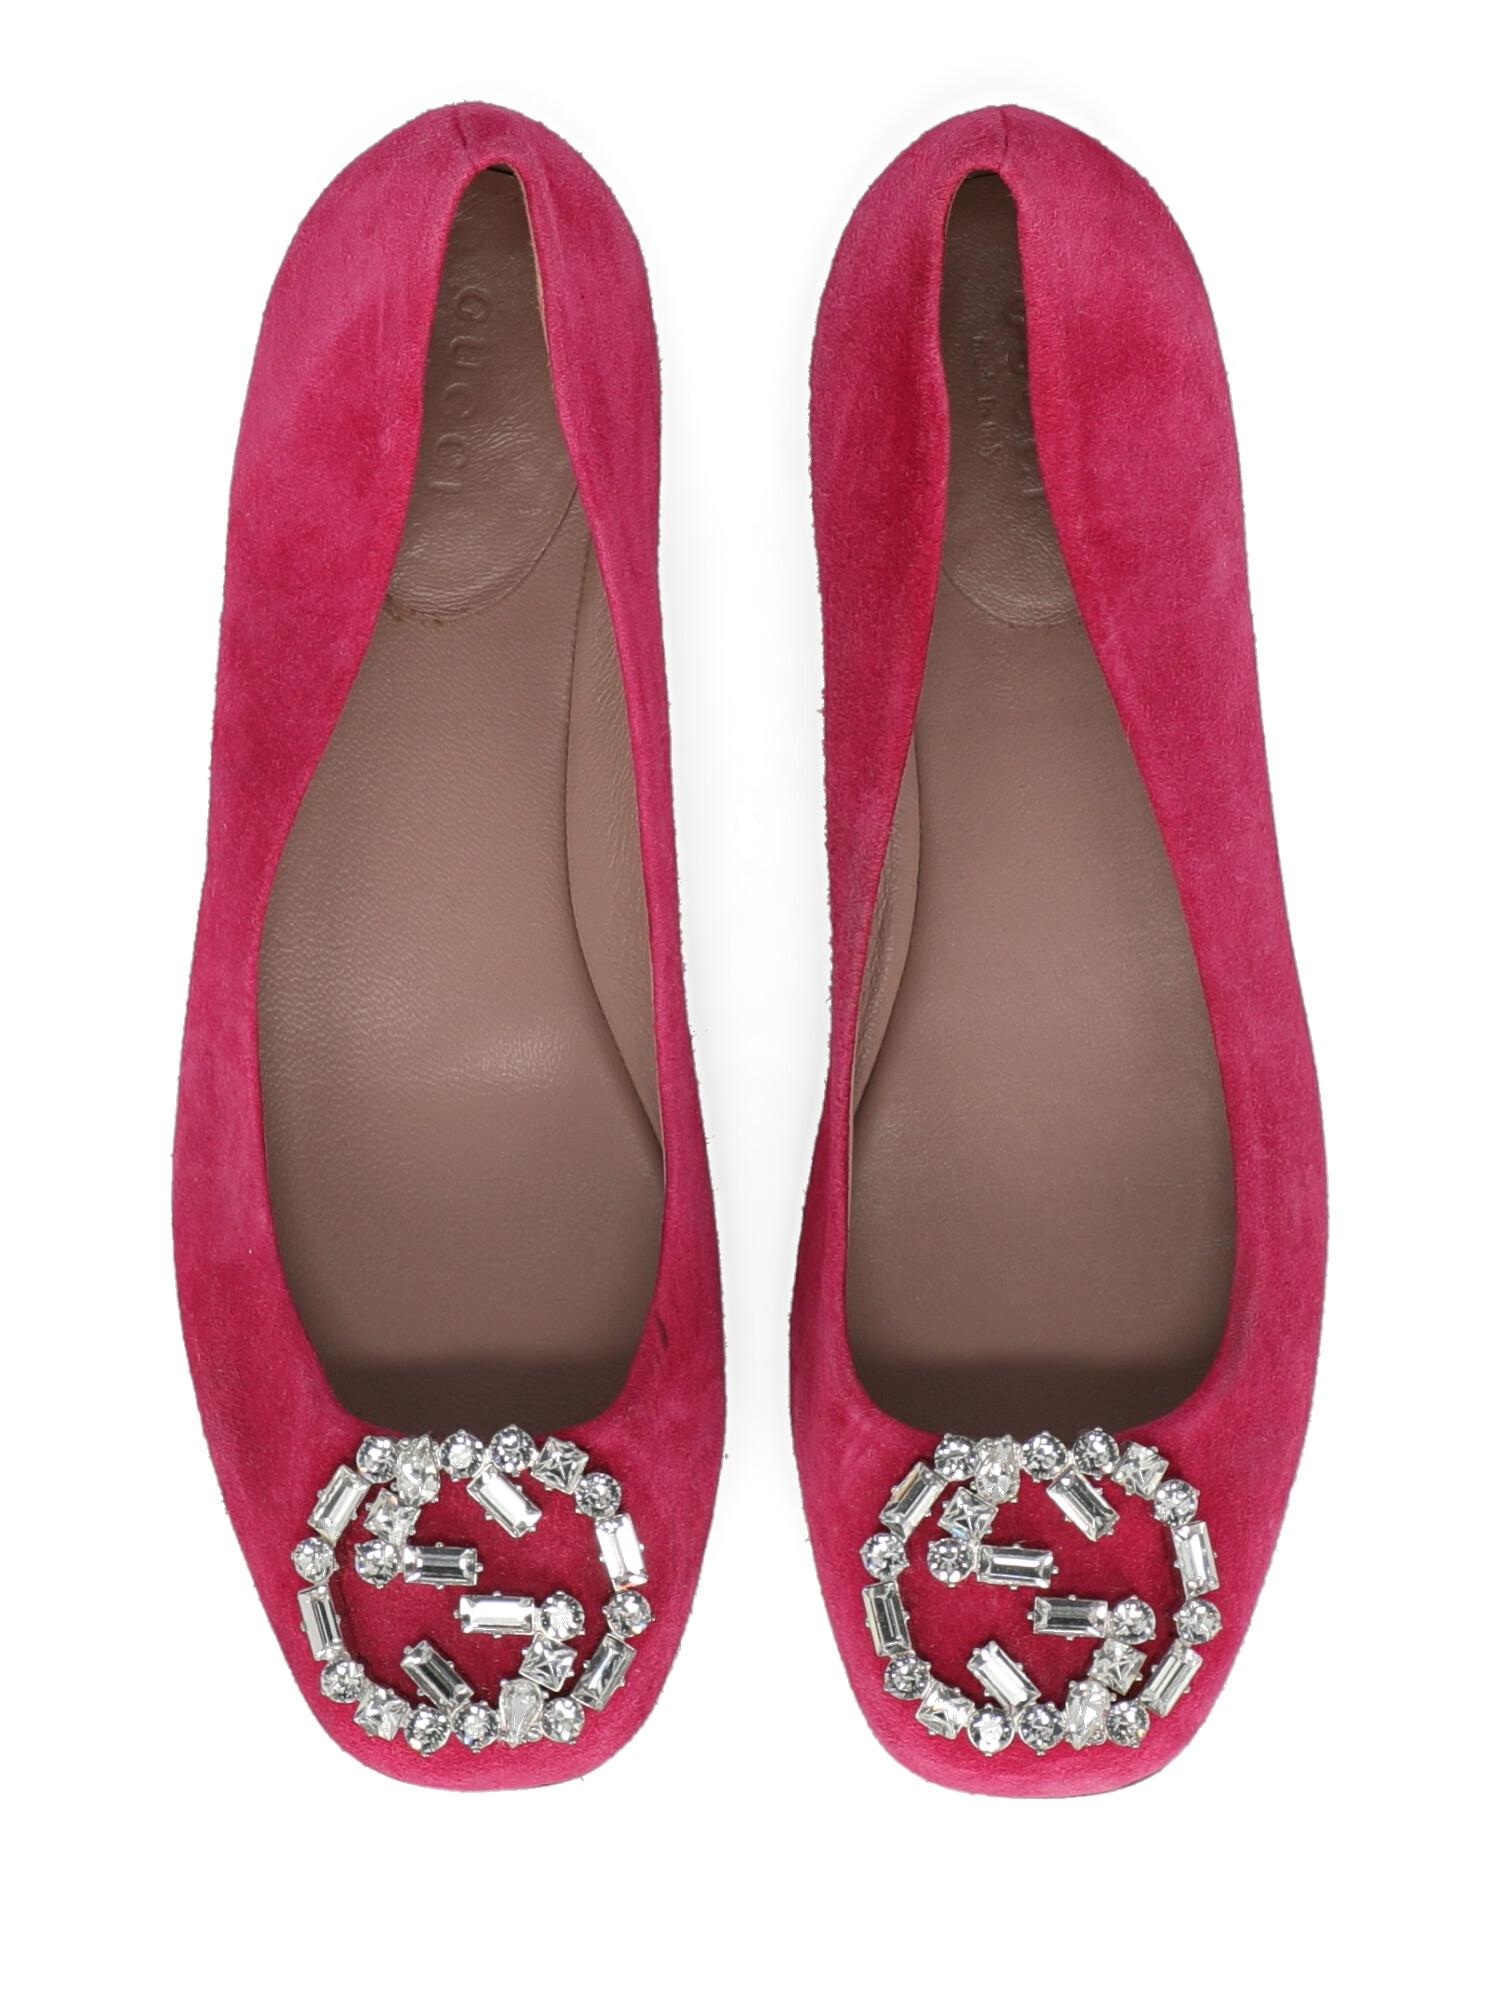 Gucci Woman Ballet flats Pink Leather IT 35.5 For Sale 2